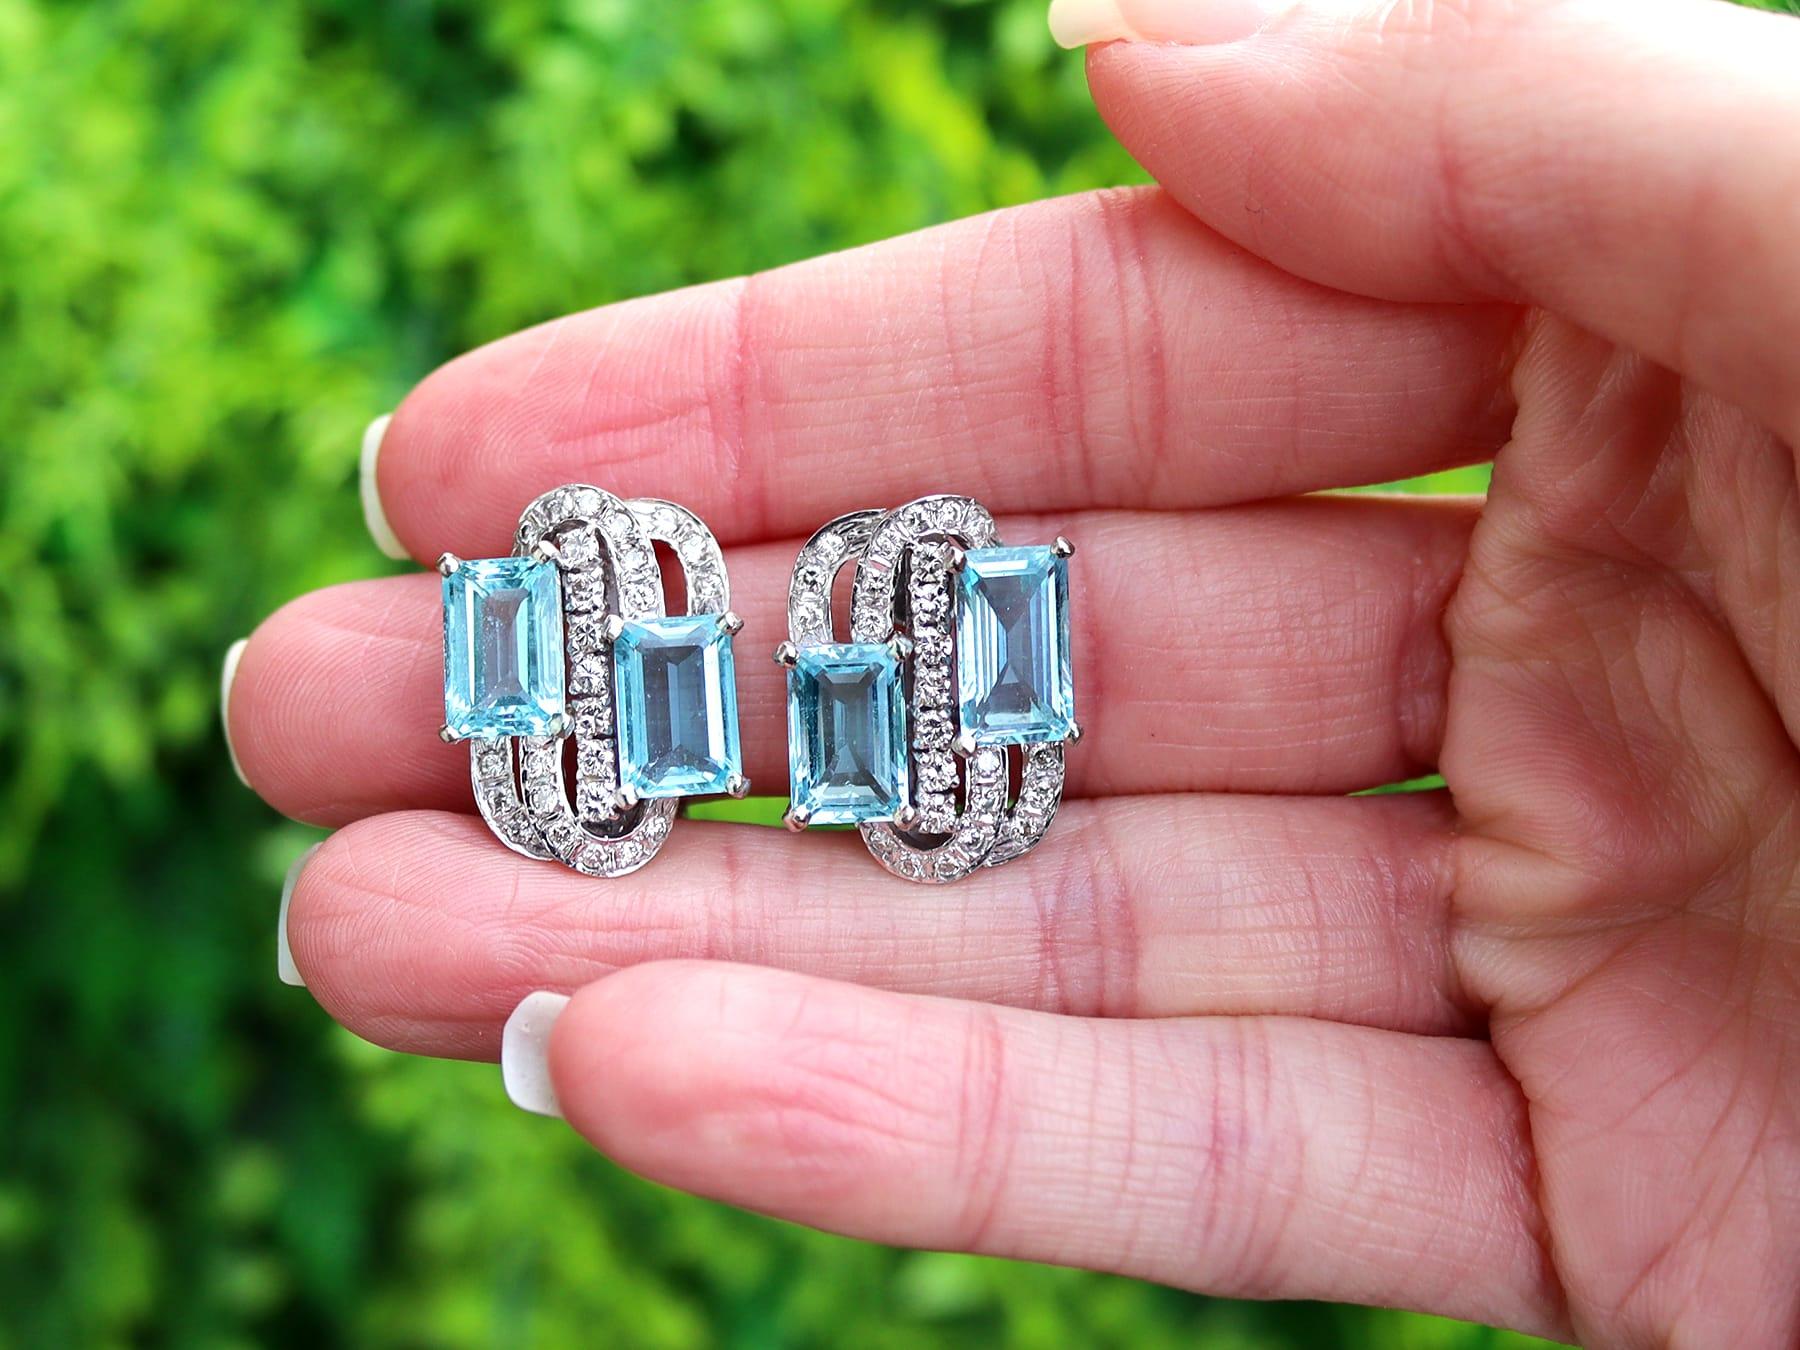 A stunning, fine and impressive pair of vintage 7.72 carat natural aquamarine and 1.18 carat diamond, 14 karat white gold earrings; part of our diverse vintage jewelry collection.

These stunning aquamarine and diamond earrings have been crafted in